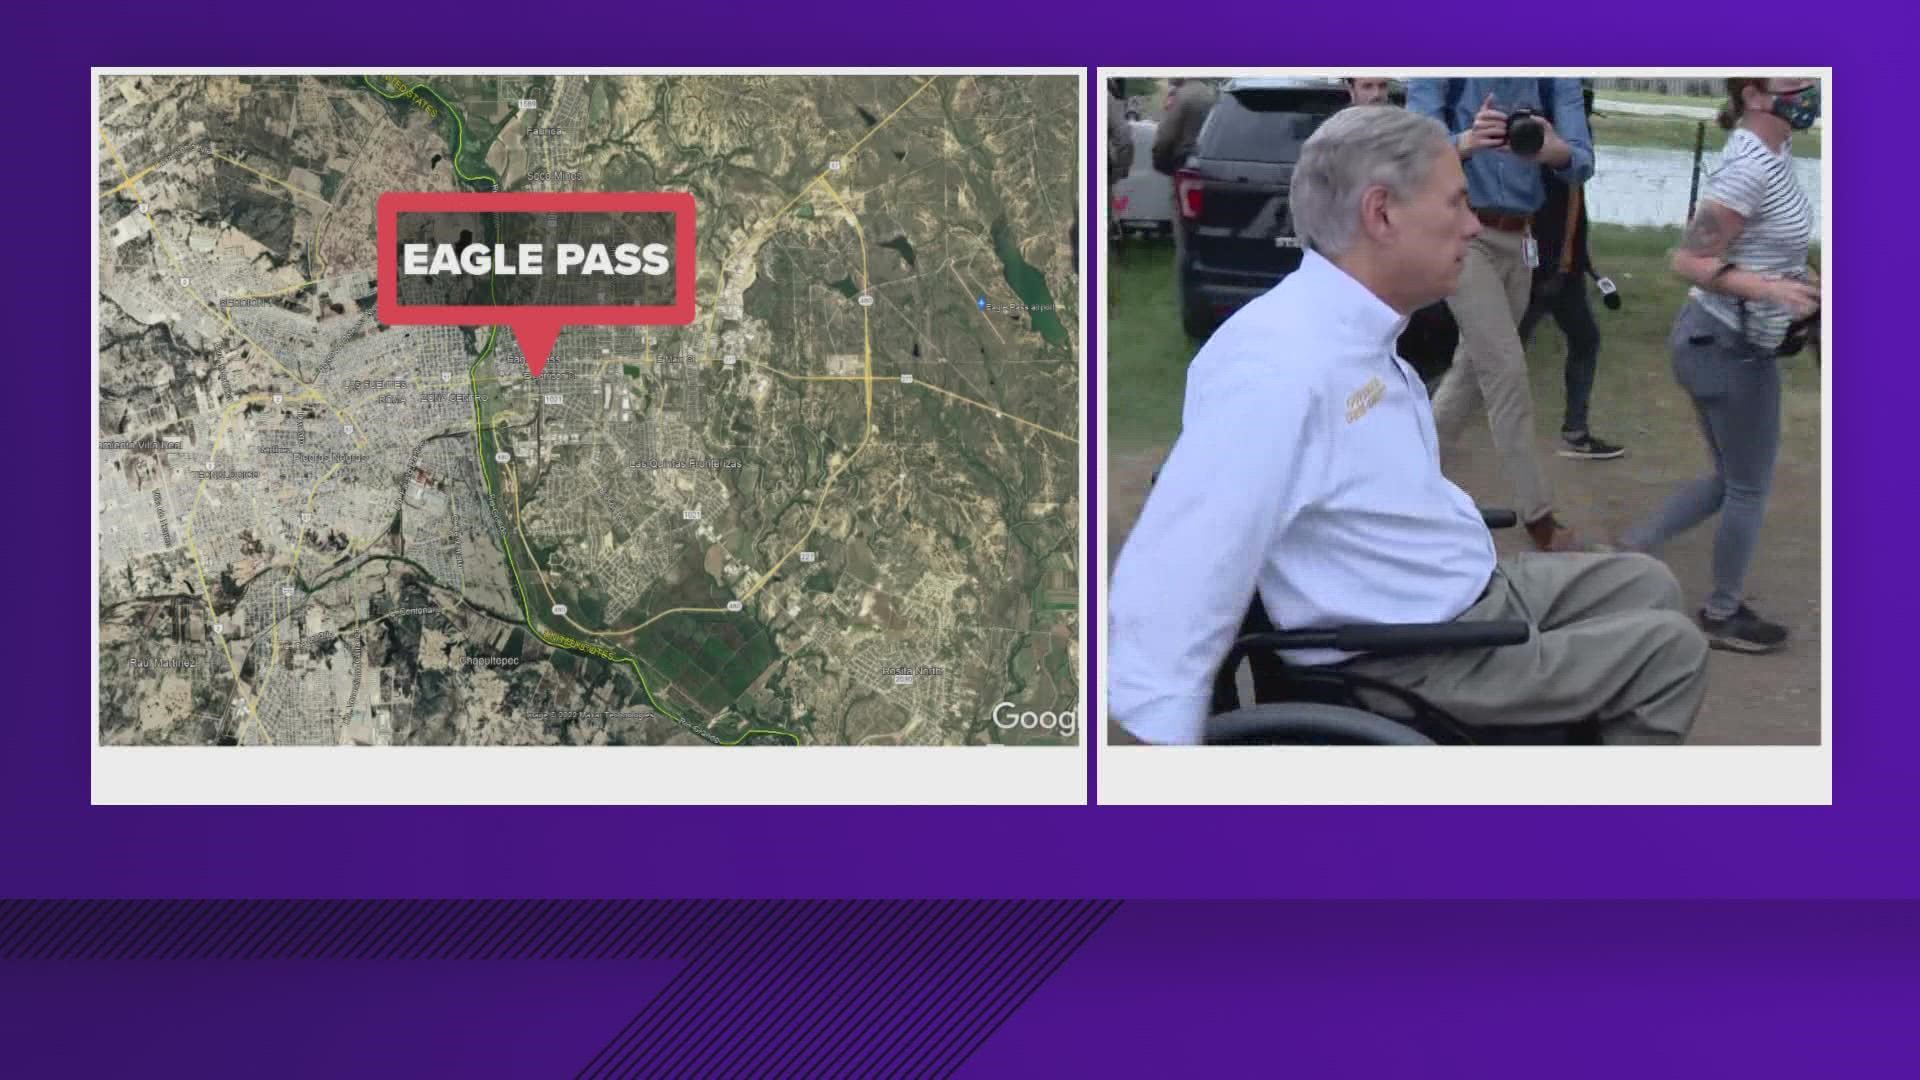 Gov. Abbott toured Texas National Guard and Texas Department of Public Safety border security assets as well as take an aerial tour of the border in Eagle Pass.